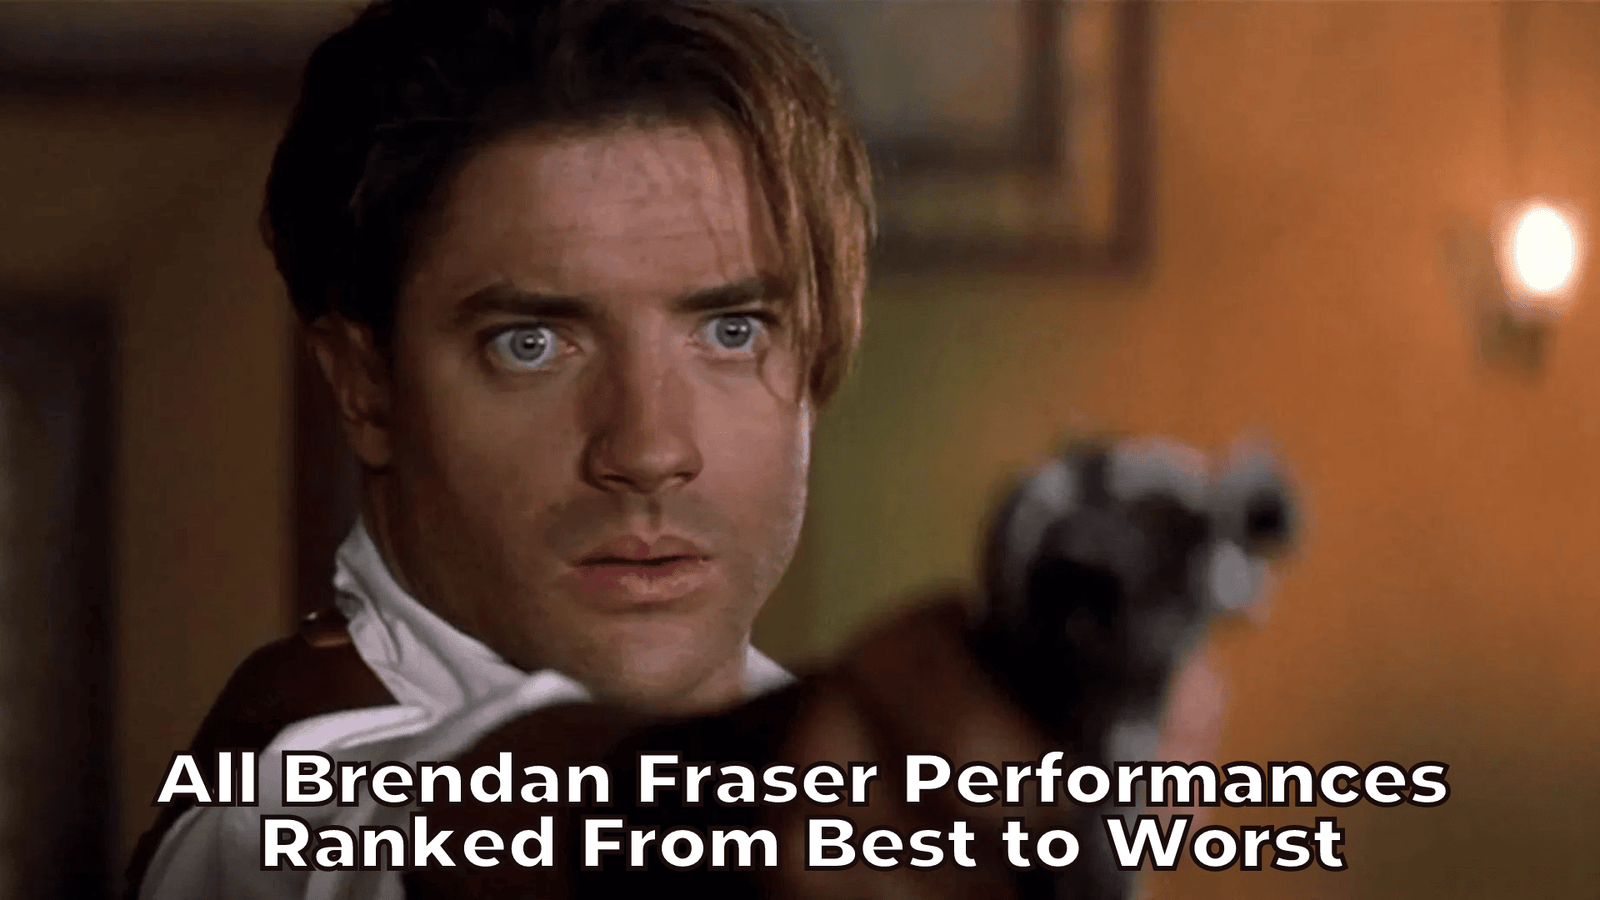 All Brendan Fraser Performances Ranked From Best to Worst